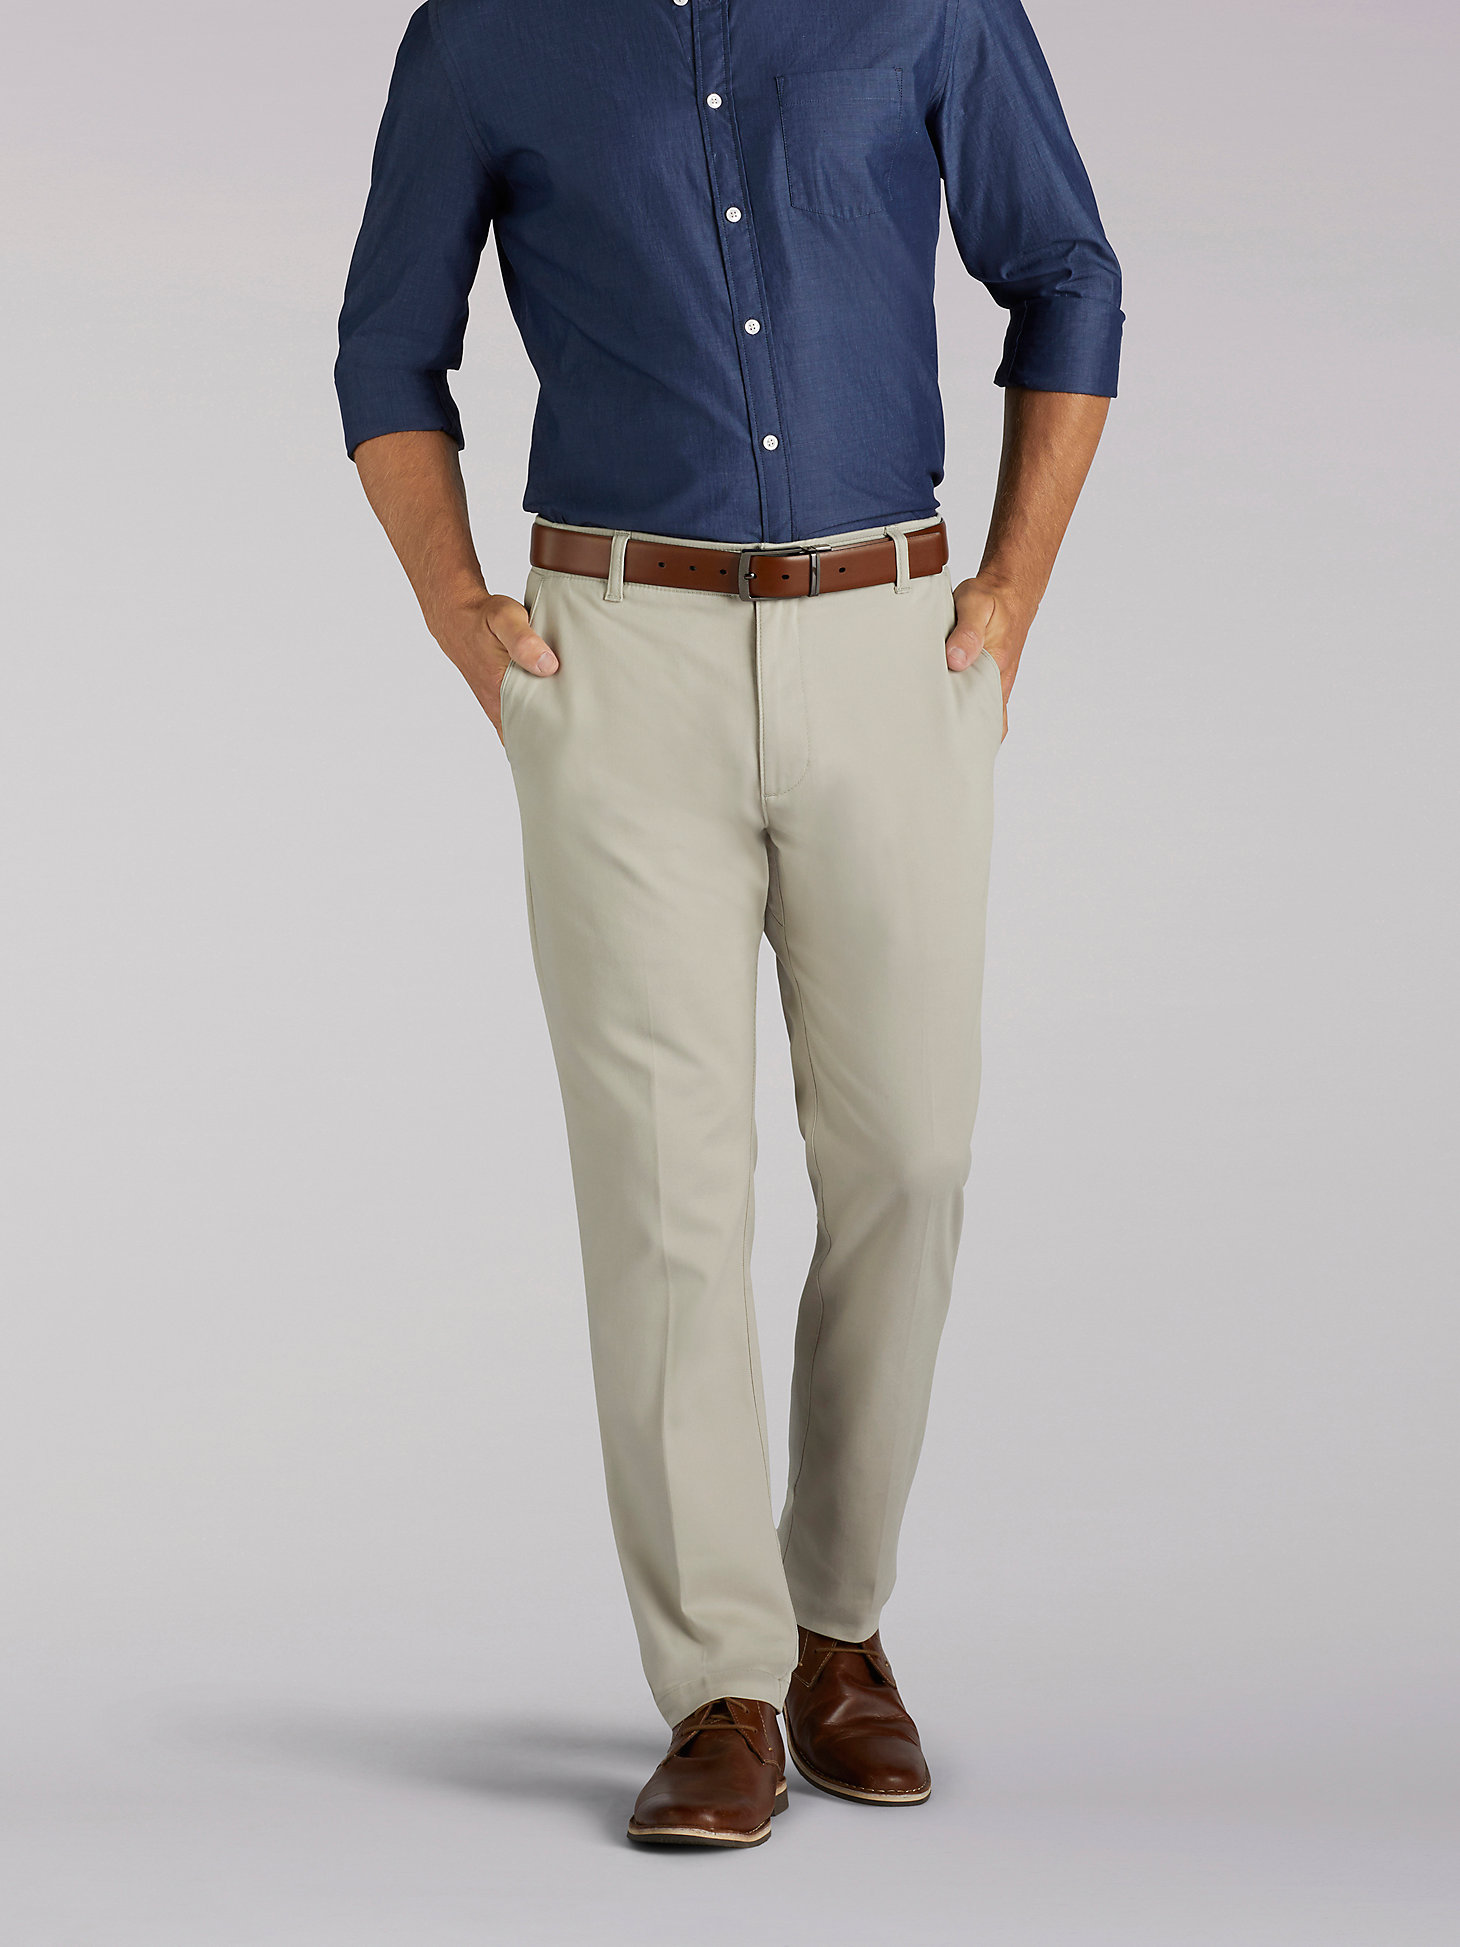 Men's Extreme Motion Relaxed Fit Pant (Big & Tall) in Dove main view